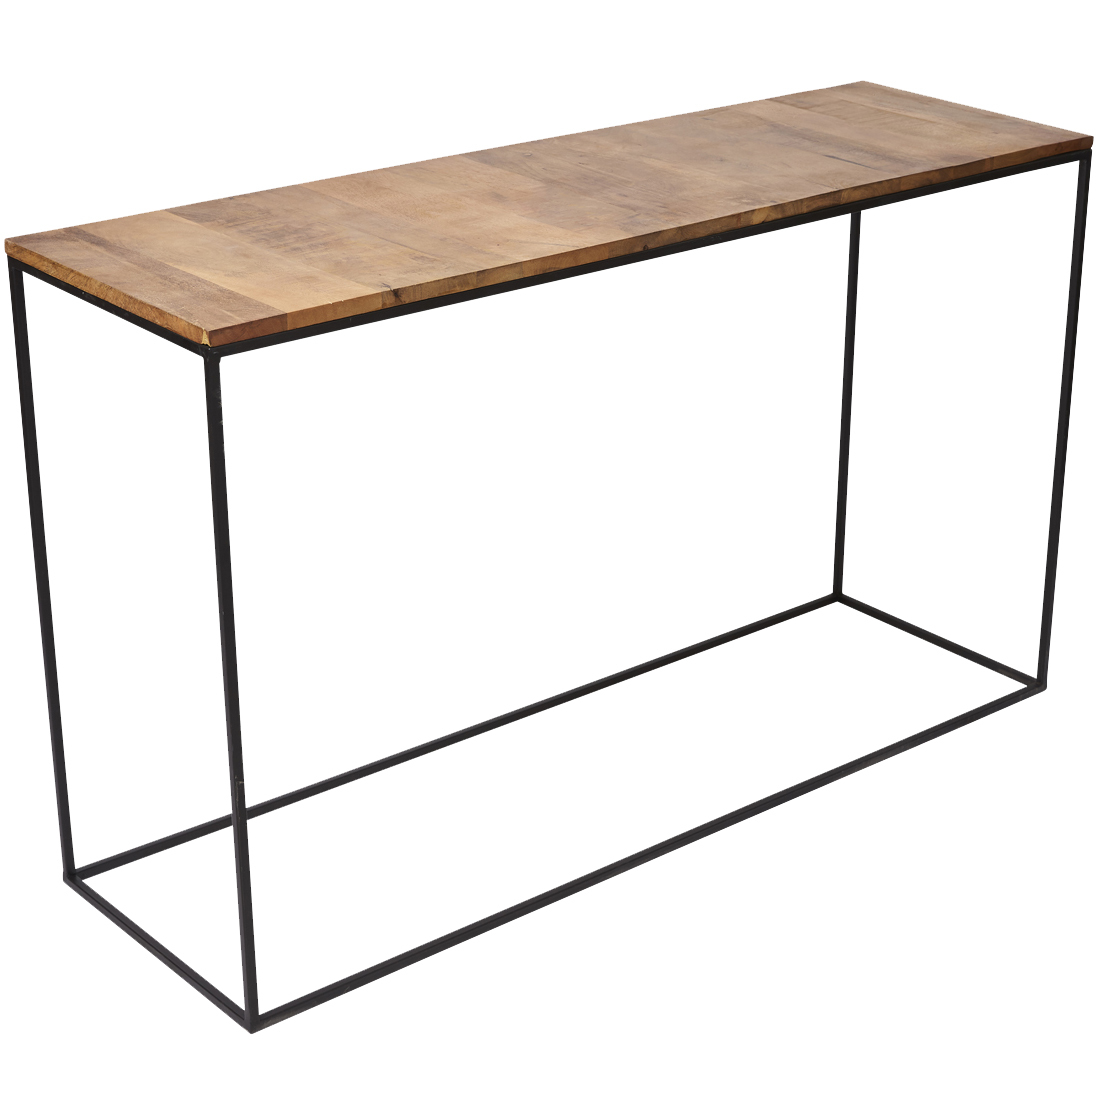 Lifestyle Traders Ava Console Table Reviews Temple Webster